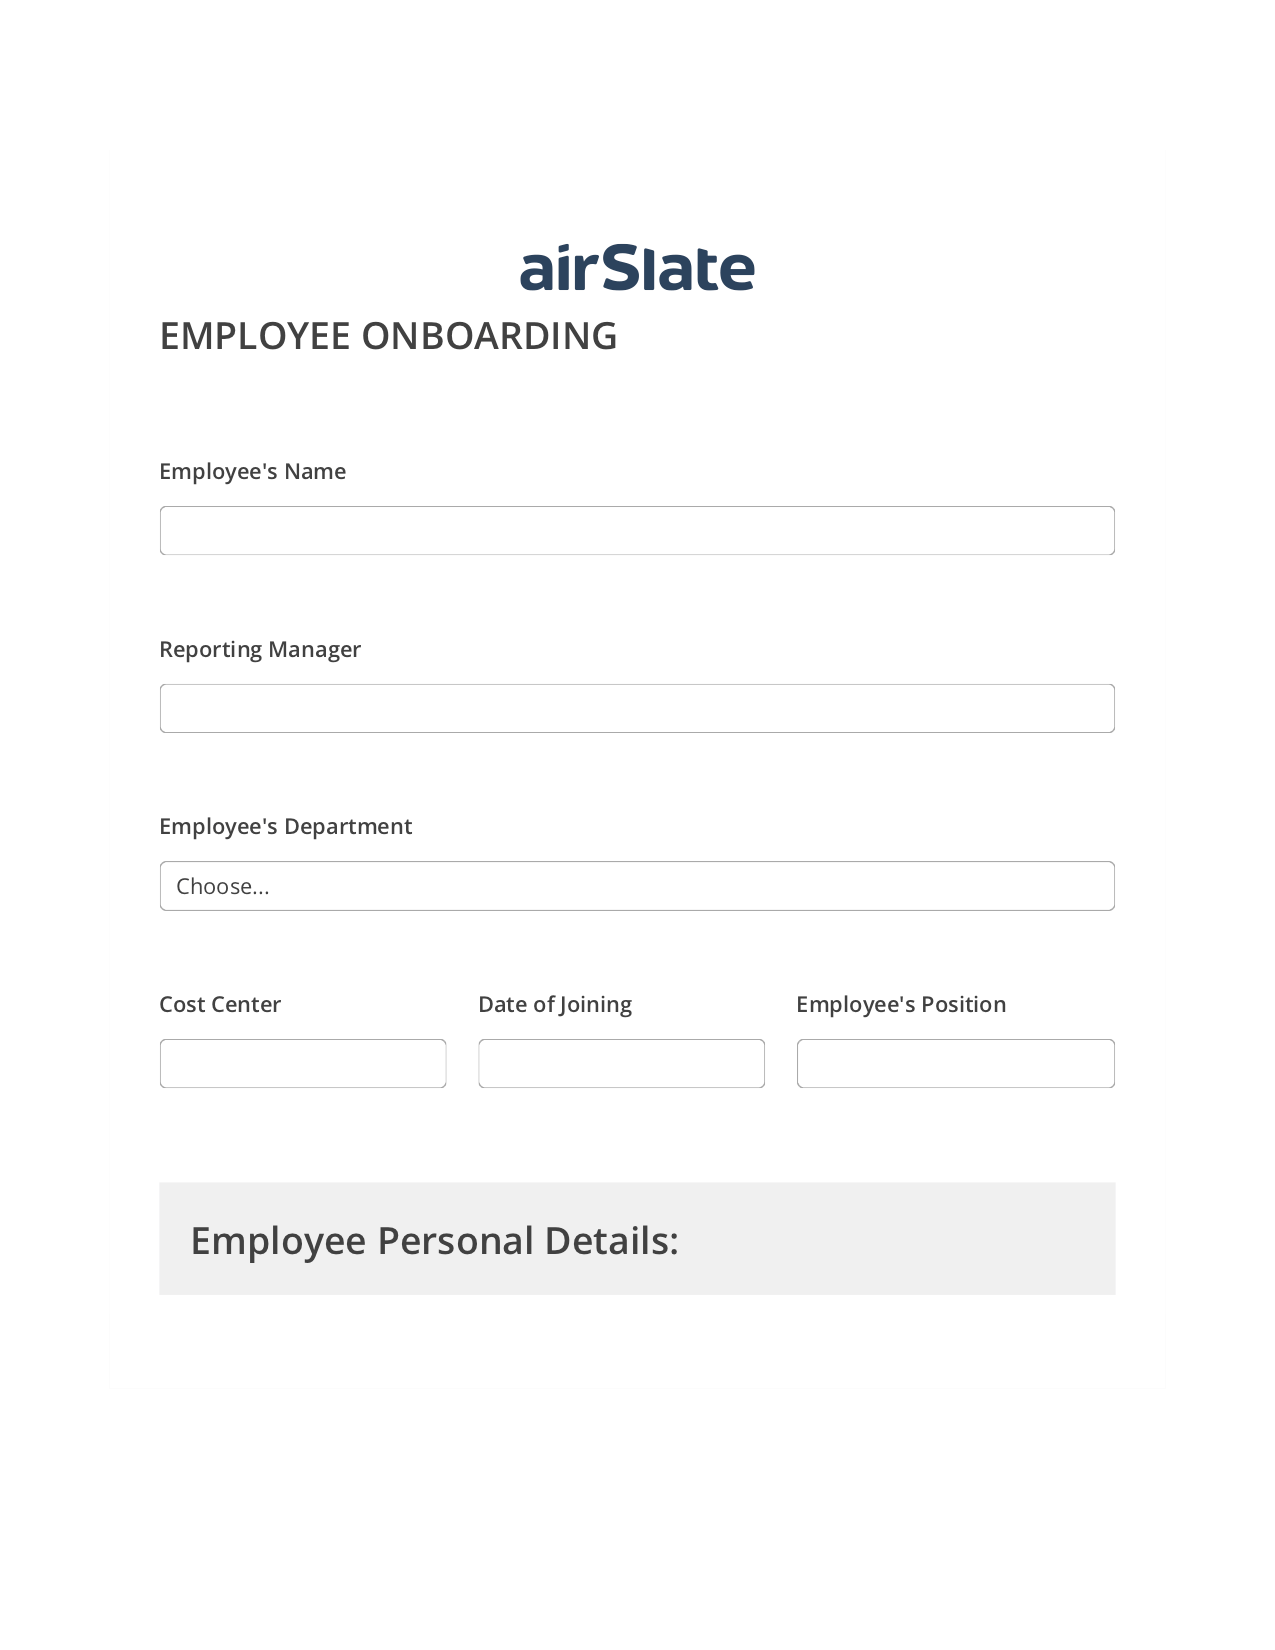 Employee Onboarding Workflow Pre-fill from Google Sheet Dropdown Options Bot, Reminder Bot, Text Message Notification Postfinish Bot